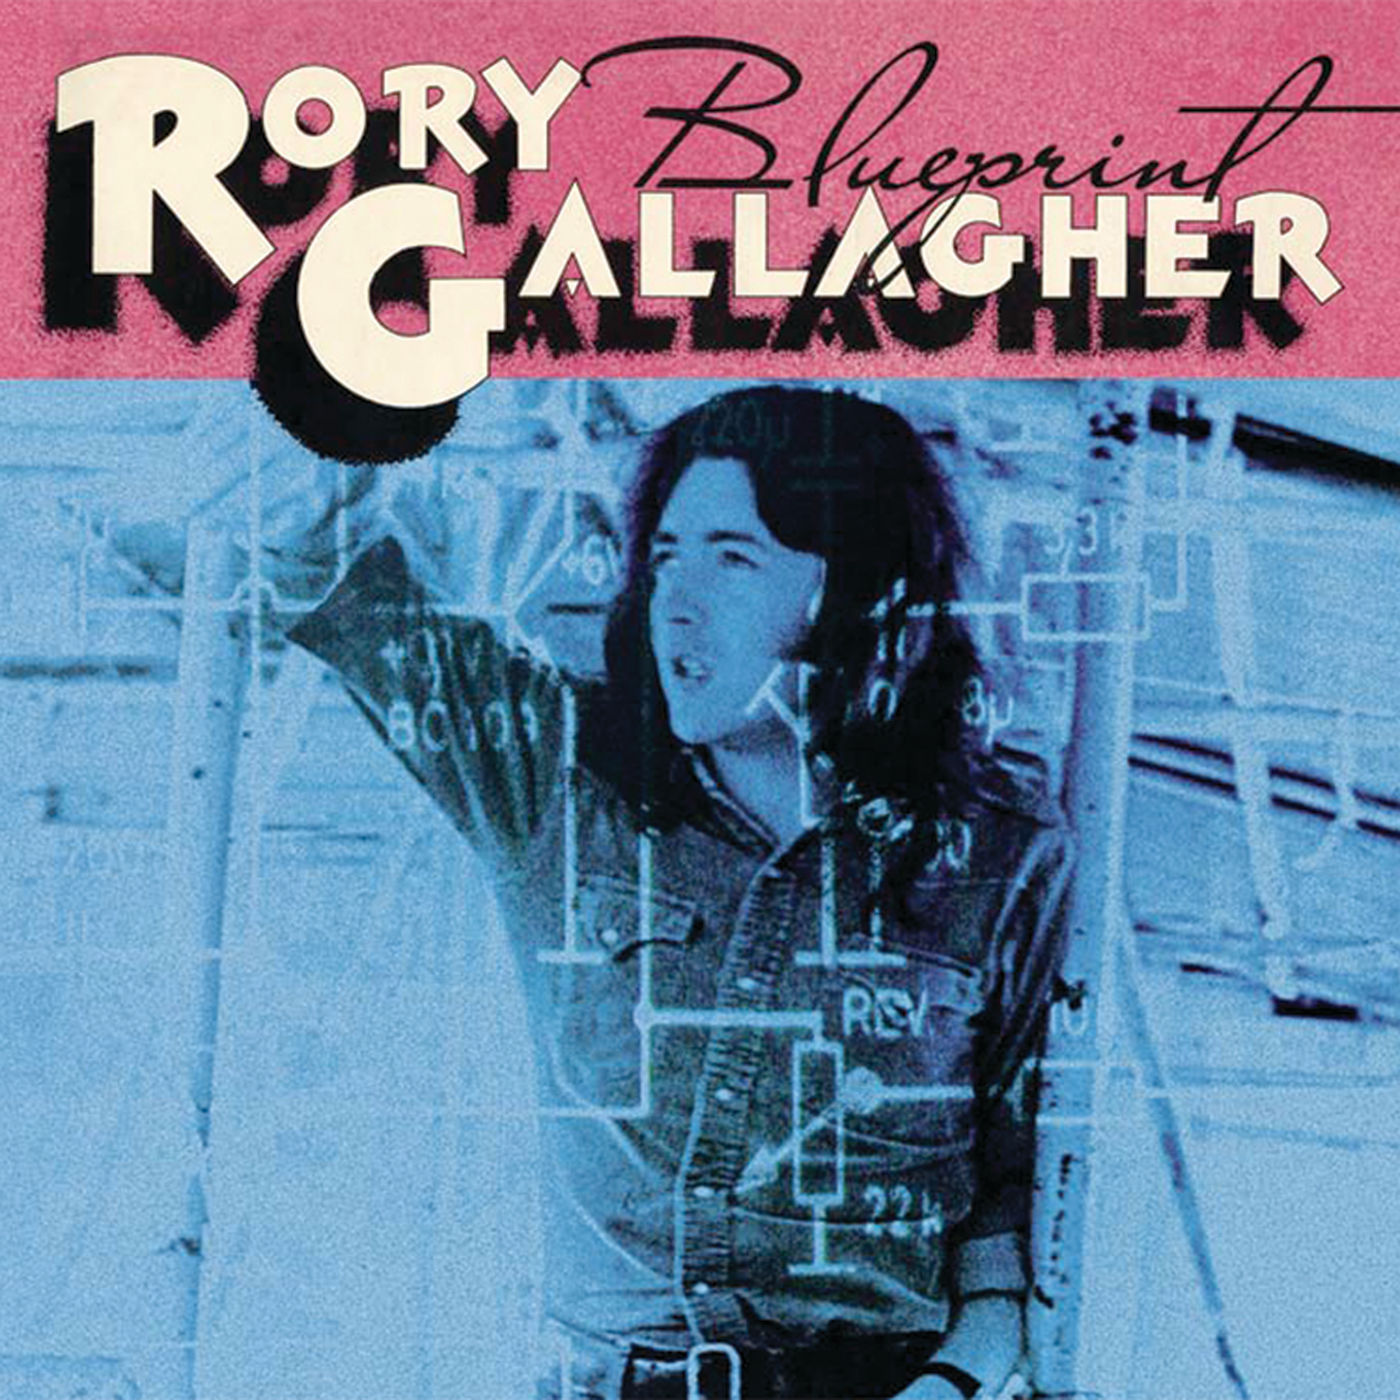 Rory Gallagher - 1973 - Blueprint [2020 HDtracks]